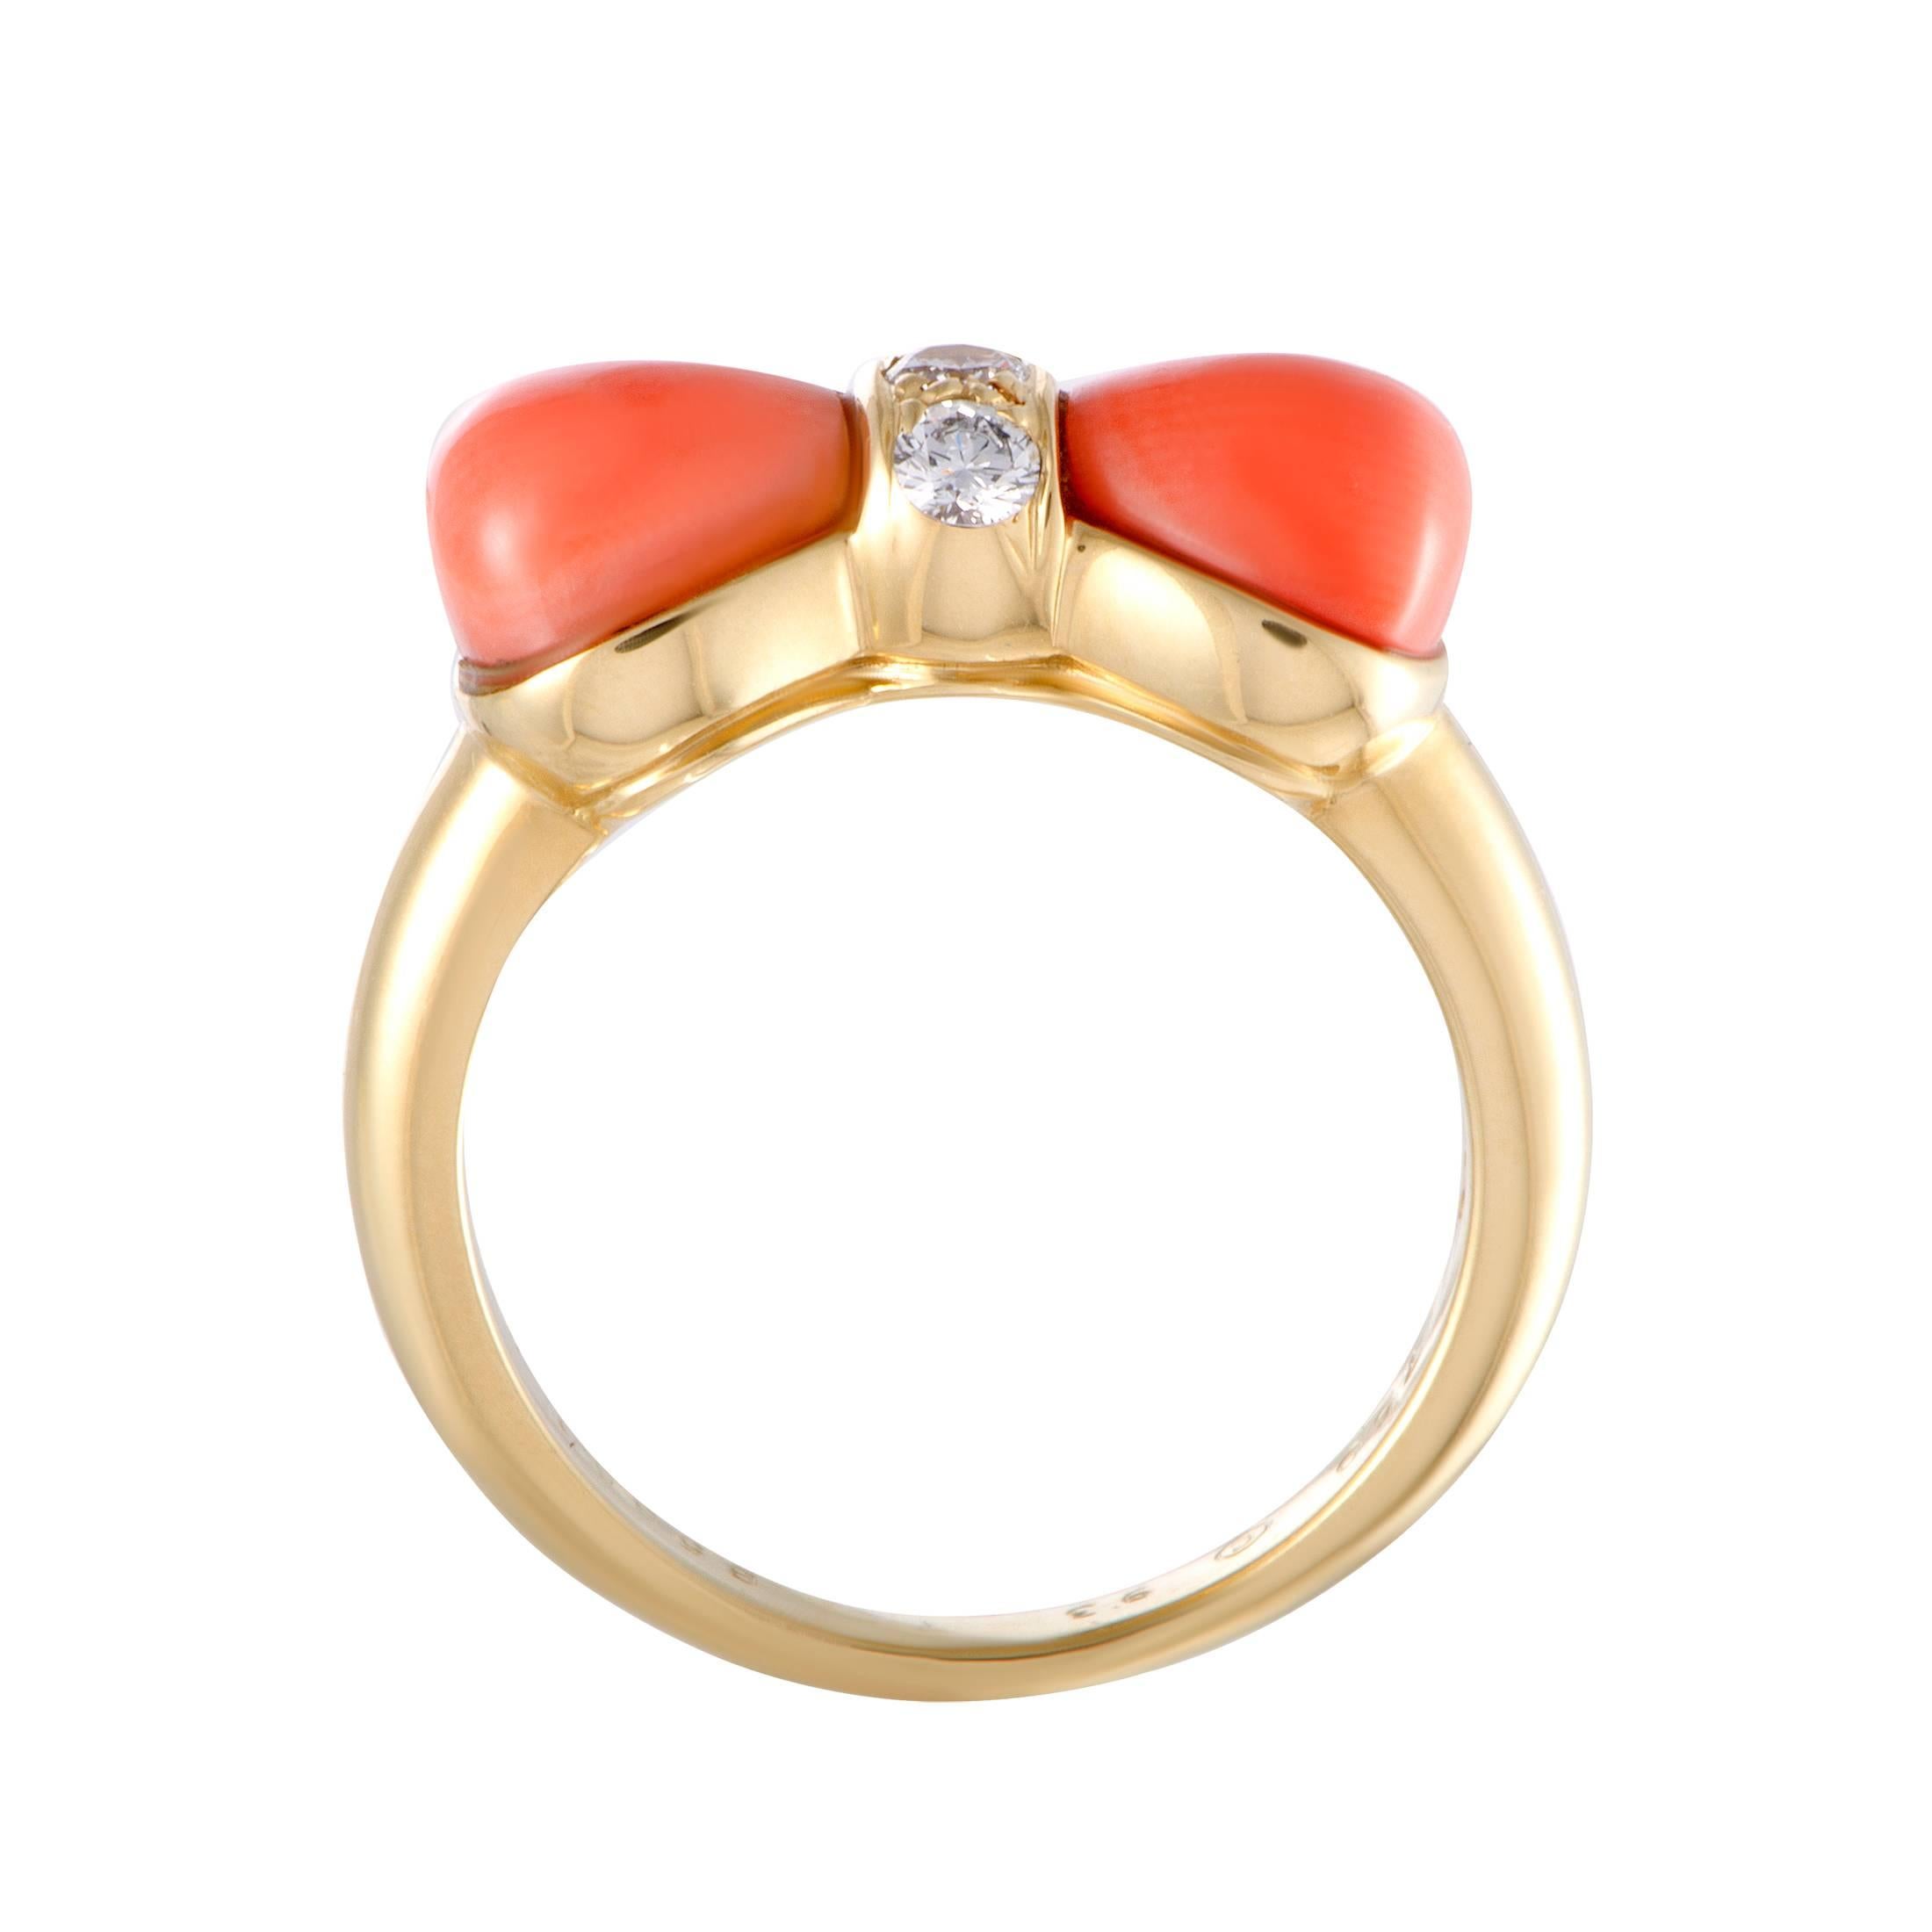 Offering a wonderfully dainty and feminine appearance, this lovely ring is designed by Van Cleef & Arpels and expertly crafted from 18K yellow gold. The ring is decorated with sublime coral and 0.10 carats of diamonds.
Ring Top Dimensions: 7mm x